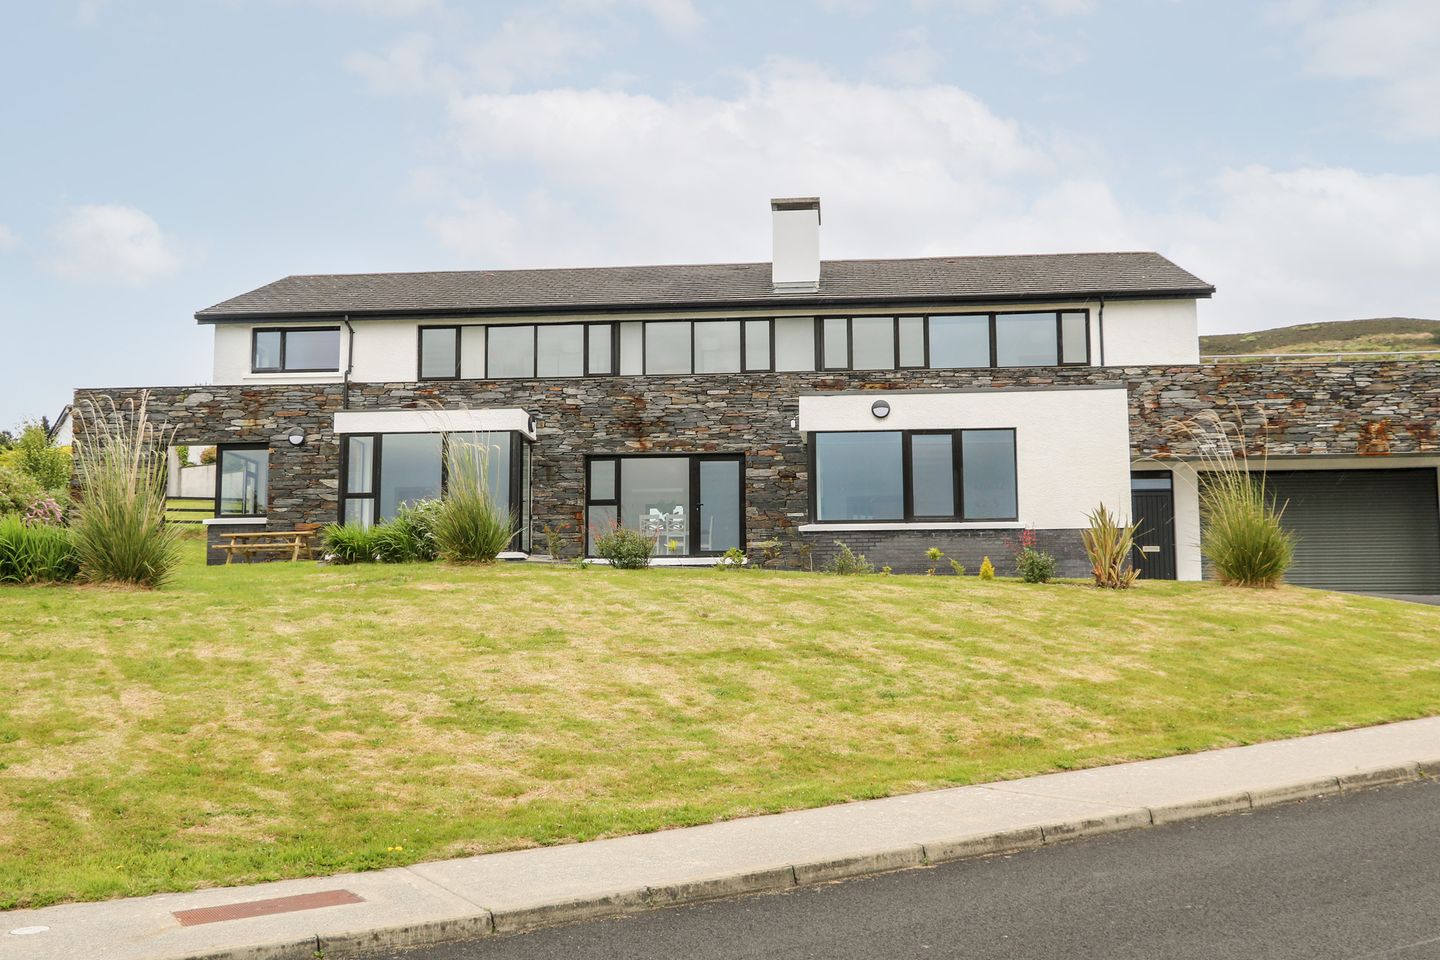 Ref. 1066790 5 Harbour View, 5 HARBOUR VIEW, GOLLA, Fahan, Co. Donegal